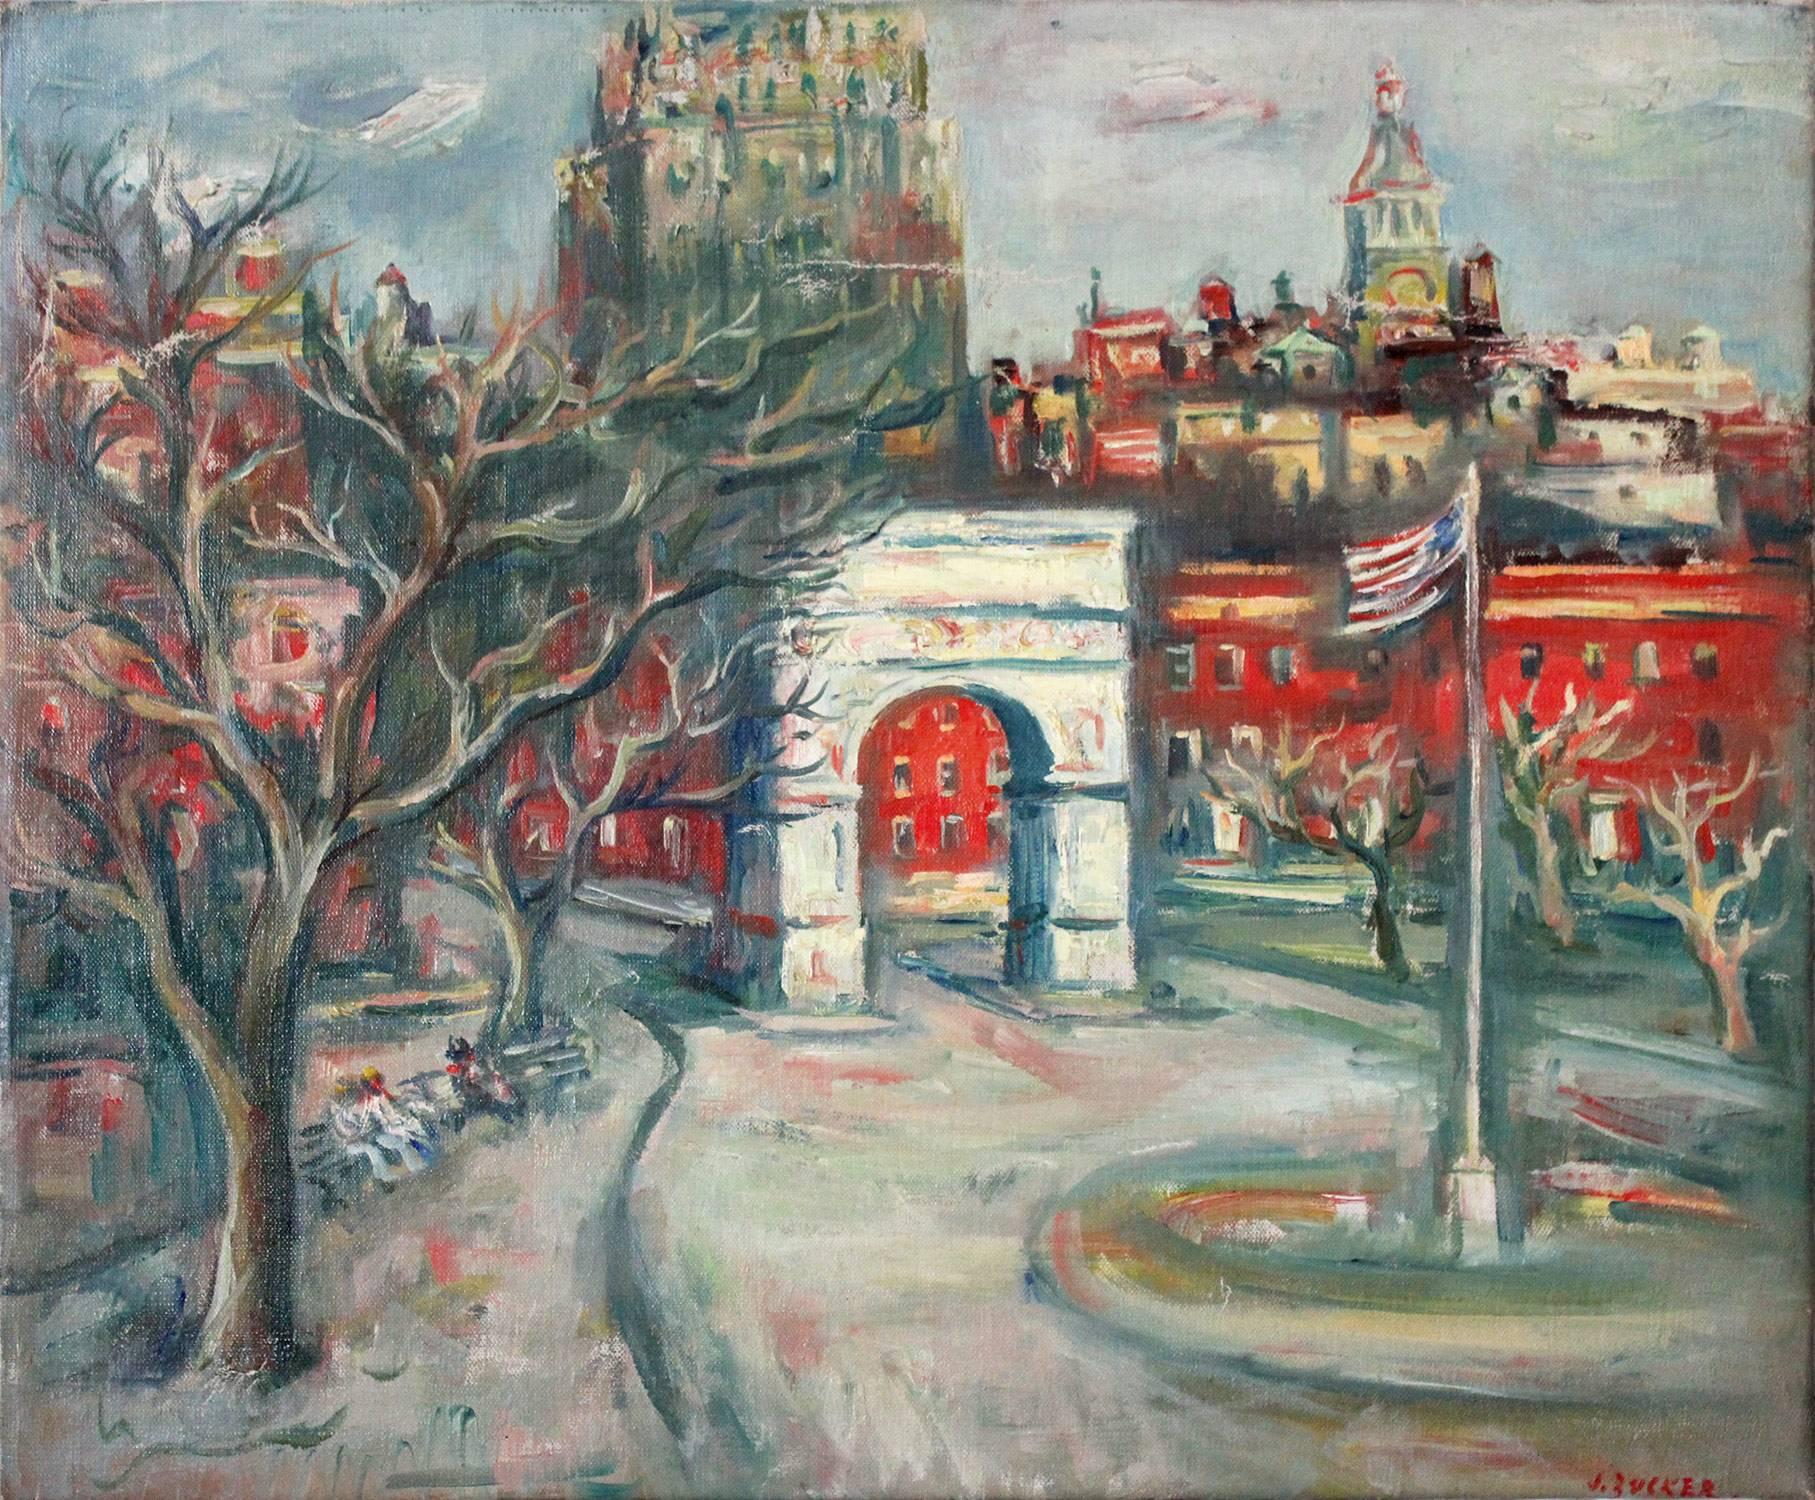 Jacques Zucker Landscape Painting - 20th Century Impressionistic Oil Painting Snow in Washington Square Park